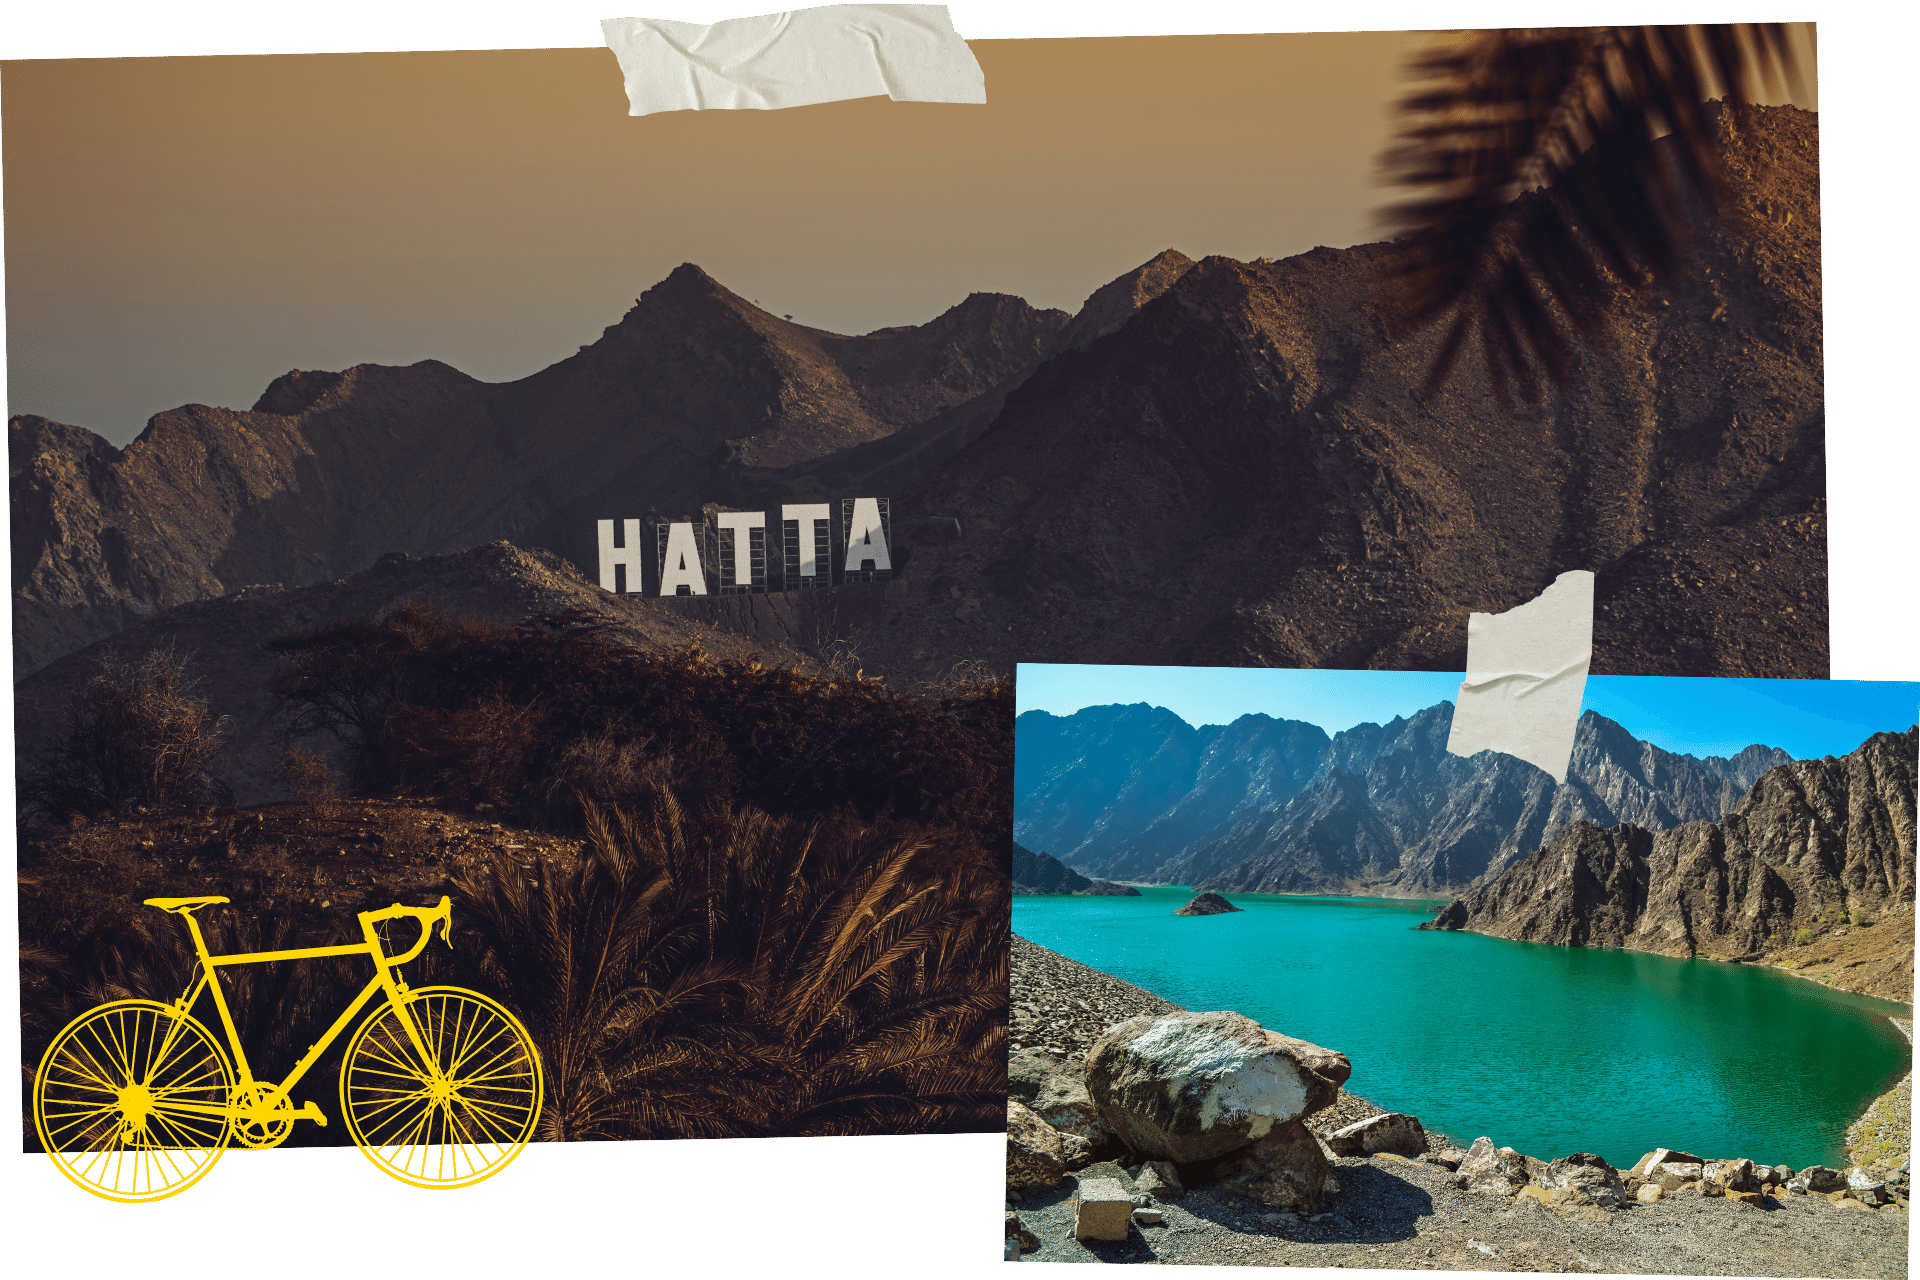 Hatta is one Dubai's hidden gems. Two images, scrapbook style, show both the hills of Hatta and the lake formed by the Hatta Dam.